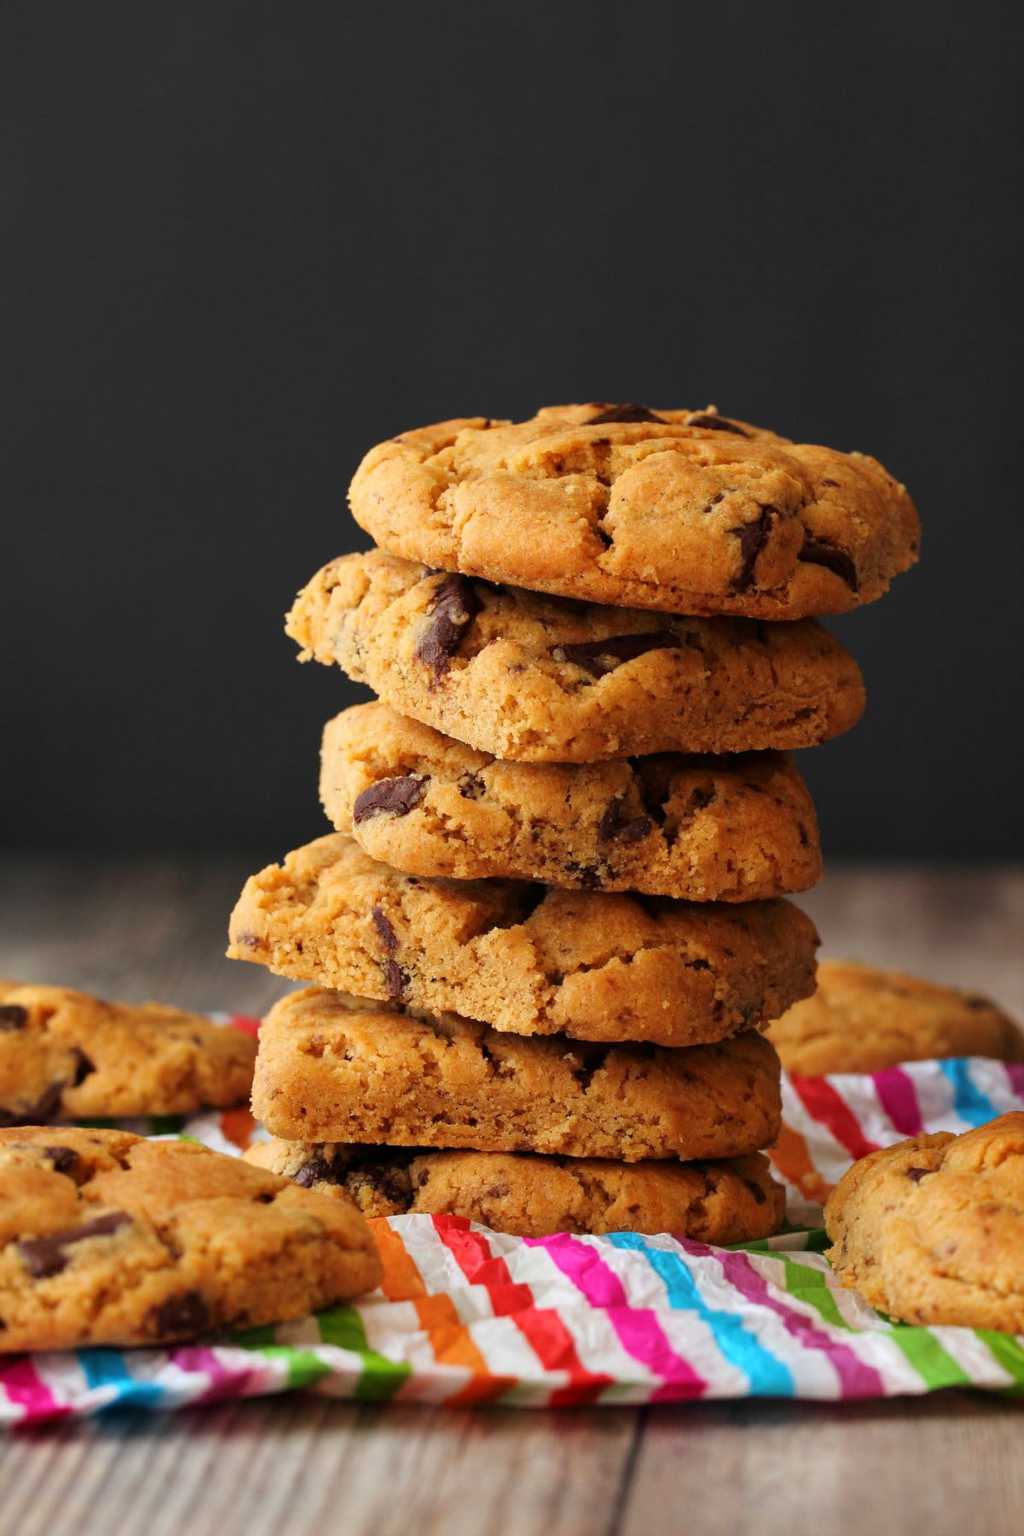 Vegan Peanut Butter Chocolate Chip Cookies in a stack against a dark background.